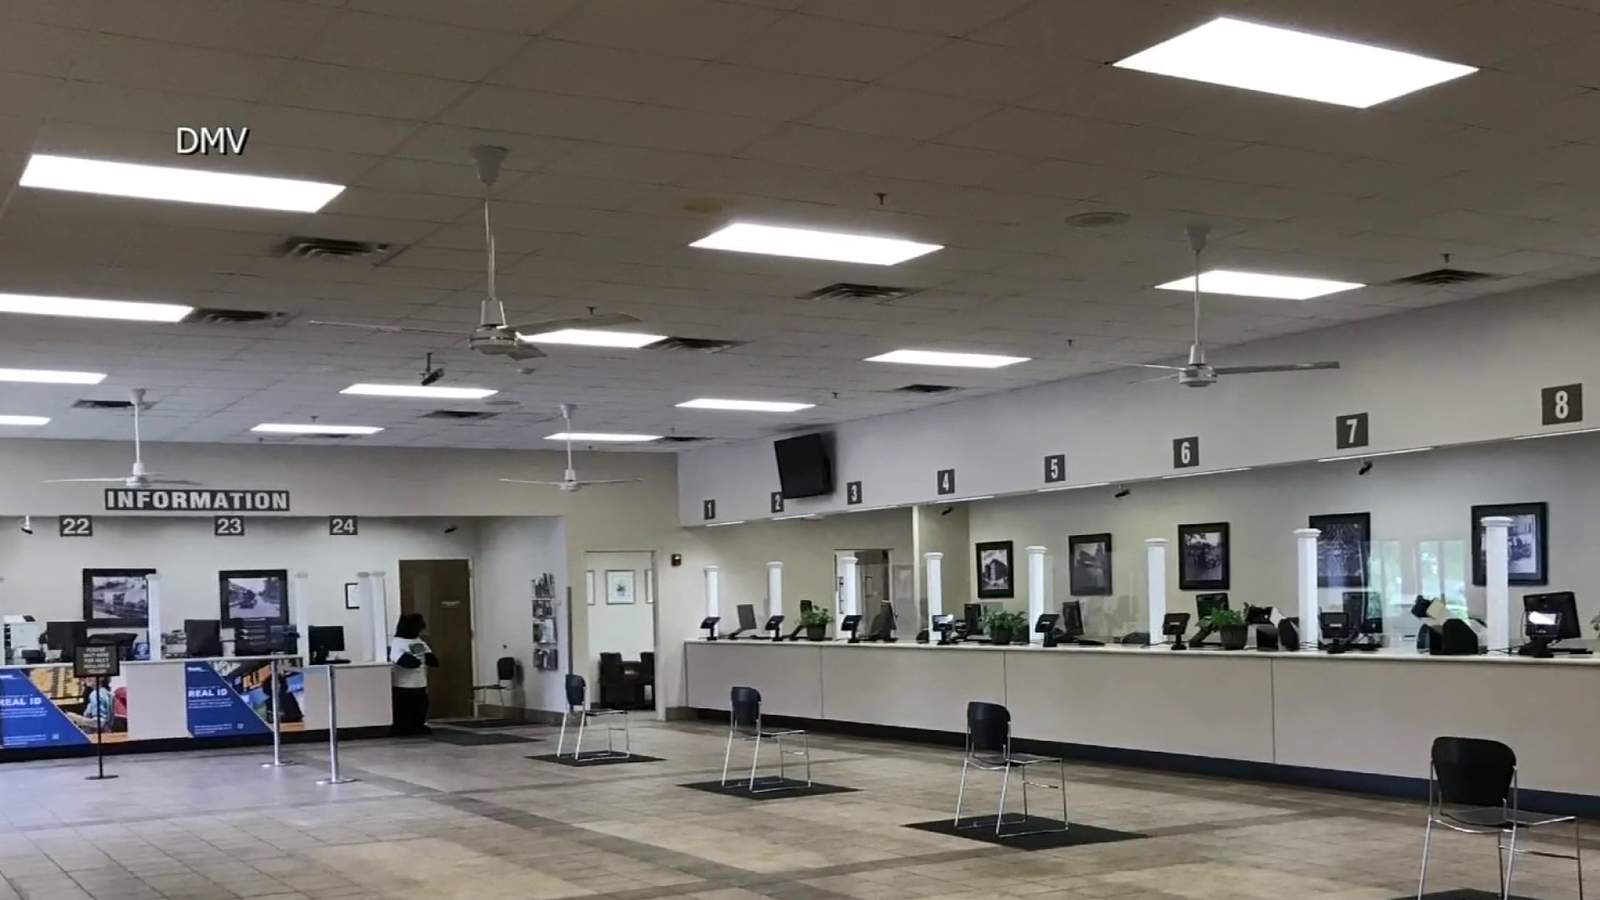 Christiansburg among Virginia DMV centers to reopen